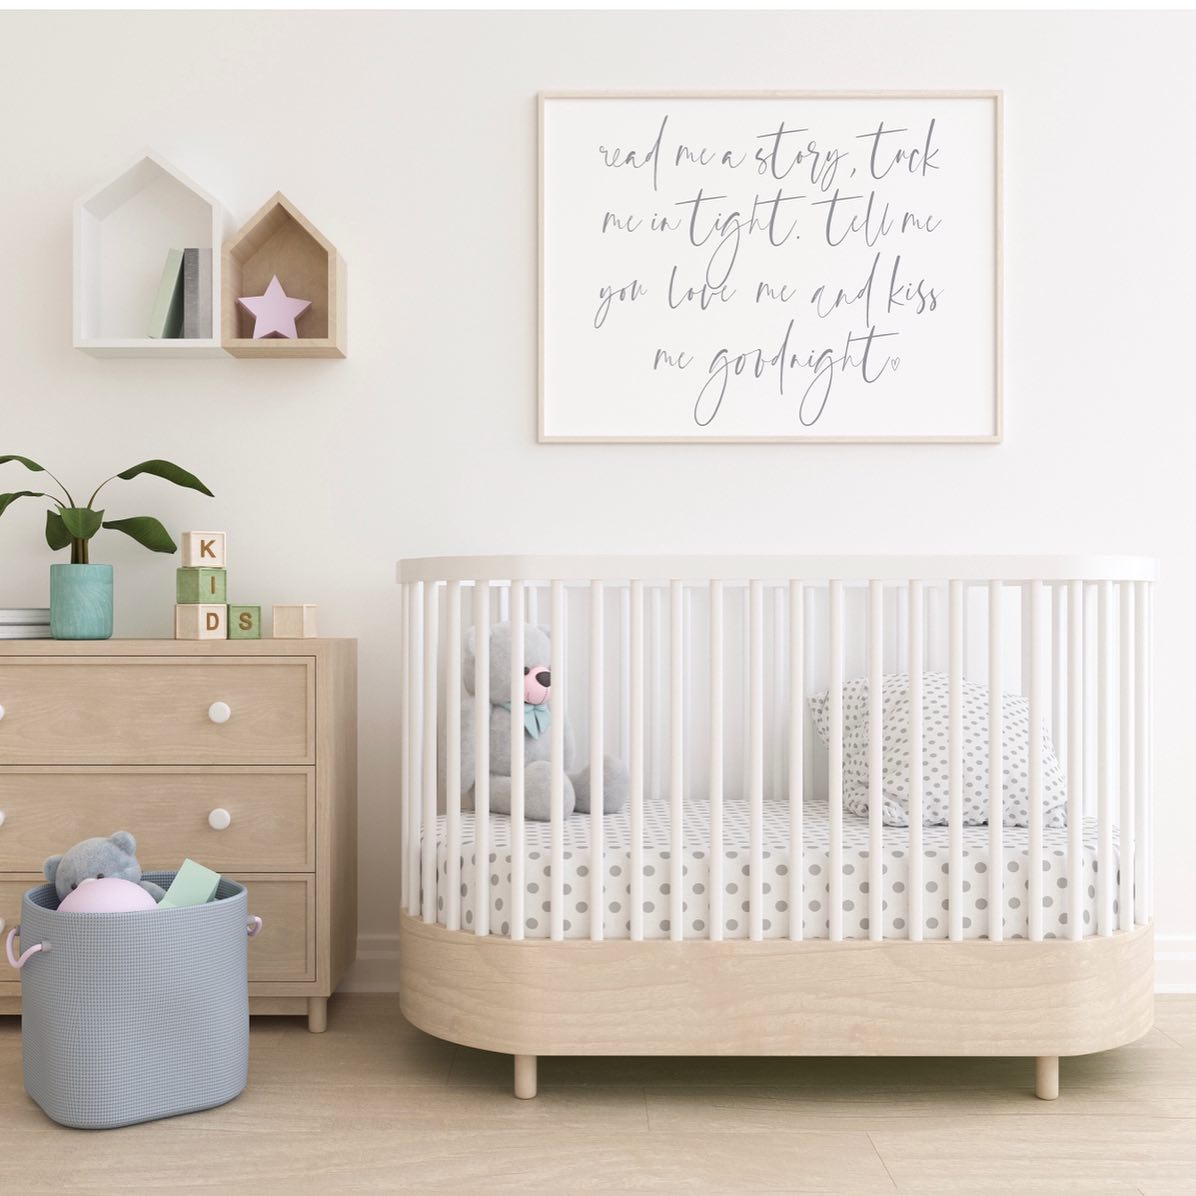 A white nursery with a painting and crib. Photo by Instagram user @_awdesigns_